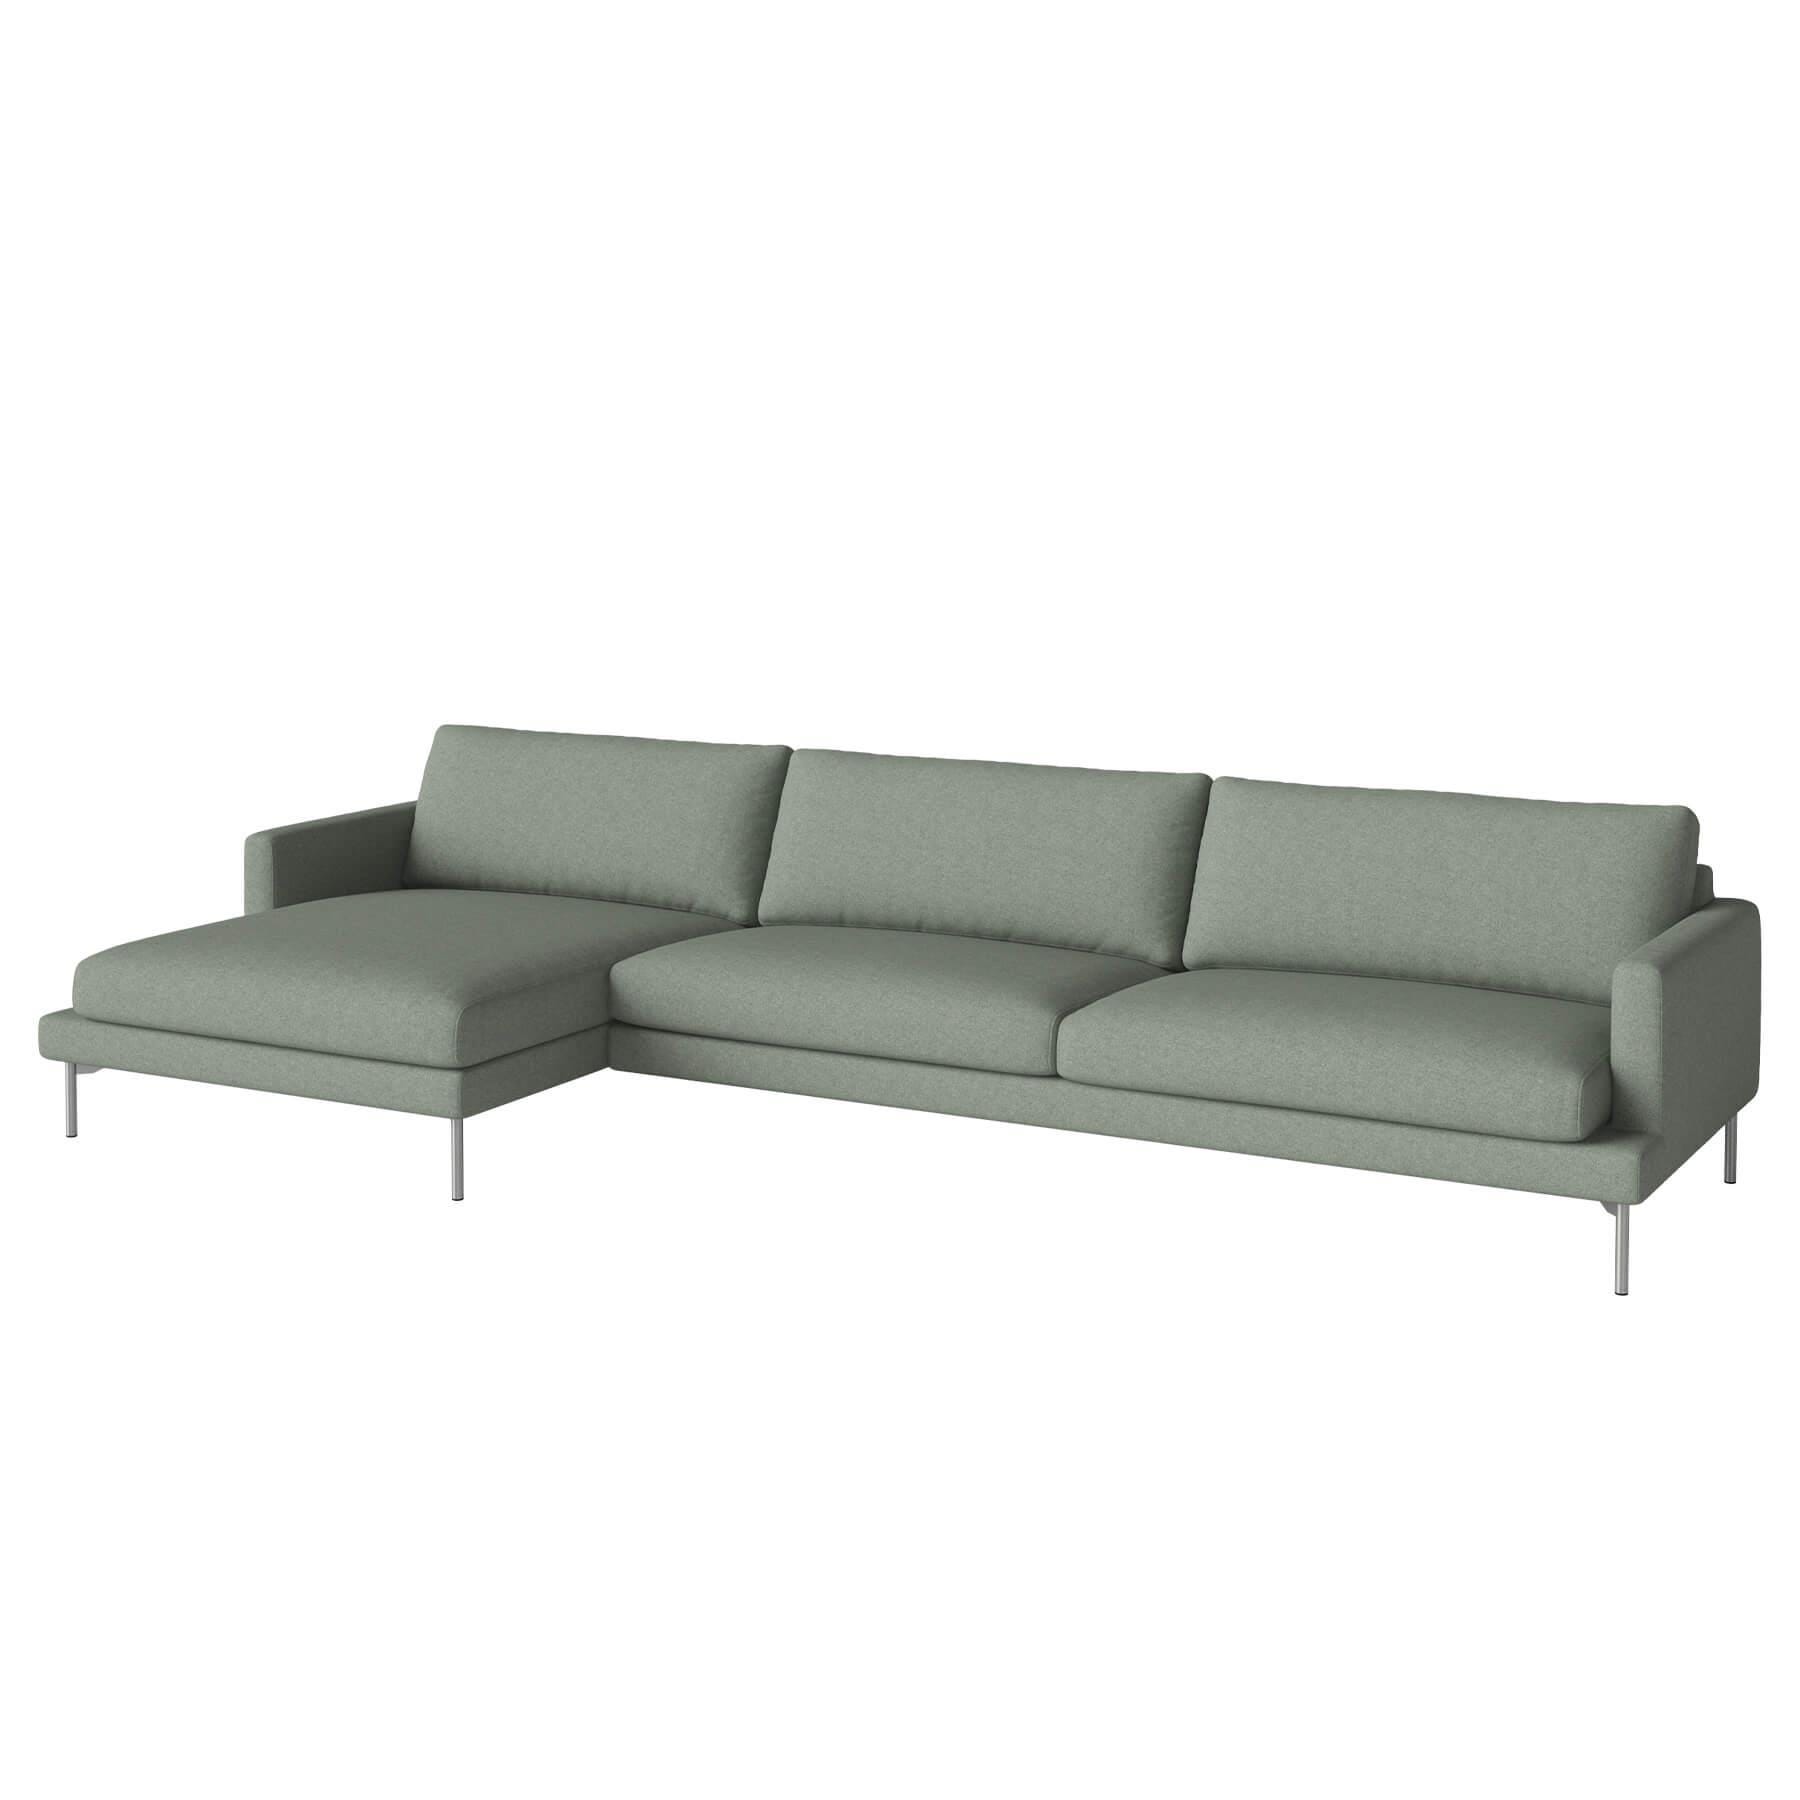 Bolia Veneda Sofa 45 Seater Sofa With Chaise Longue Brushed Steel Qual Green Left Green Designer Furniture From Holloways Of Ludlow